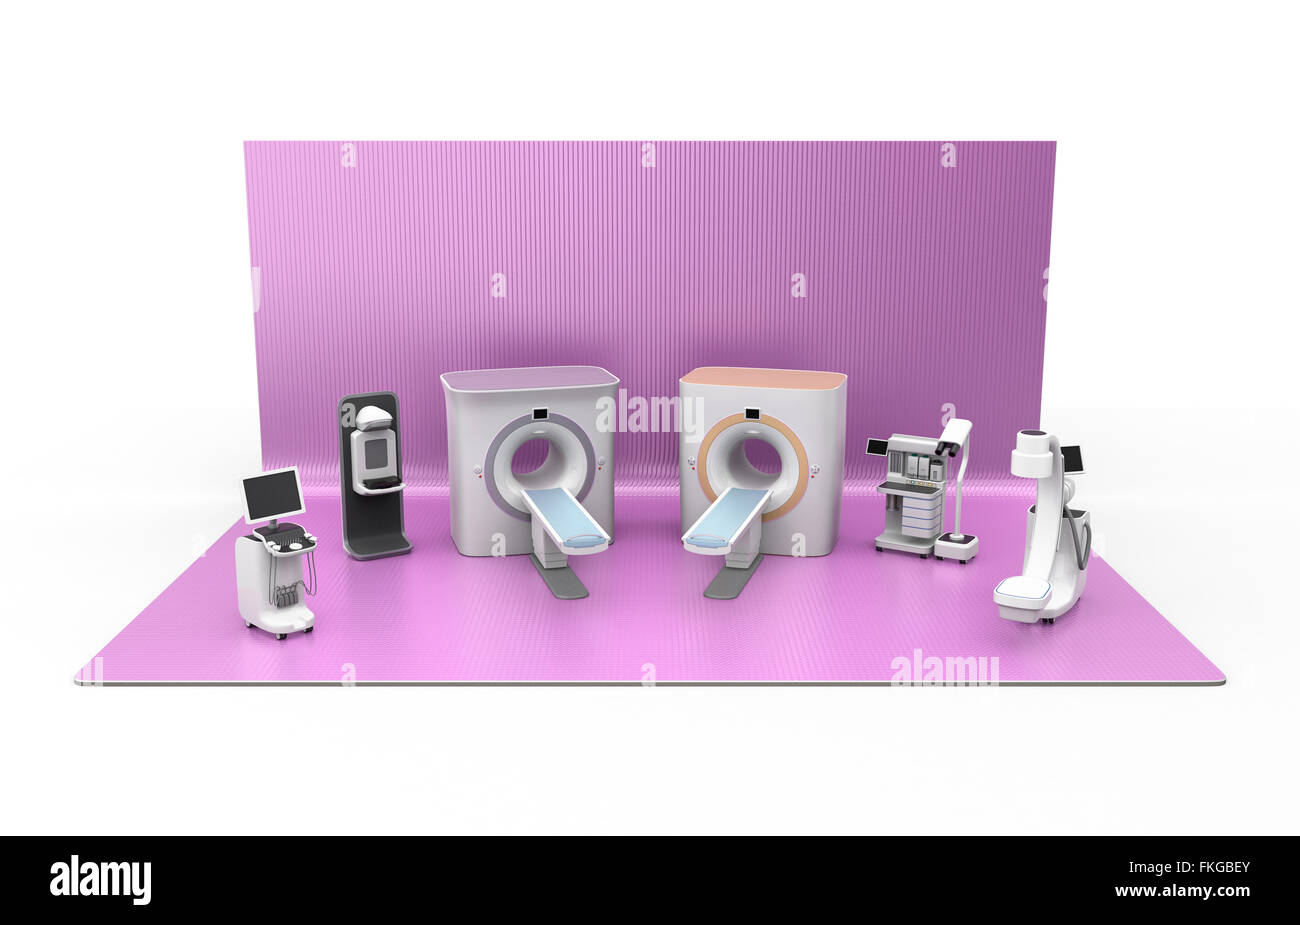 Medical imaging system on exhibition stage. Concept for medical digital work flow solution Stock Photo